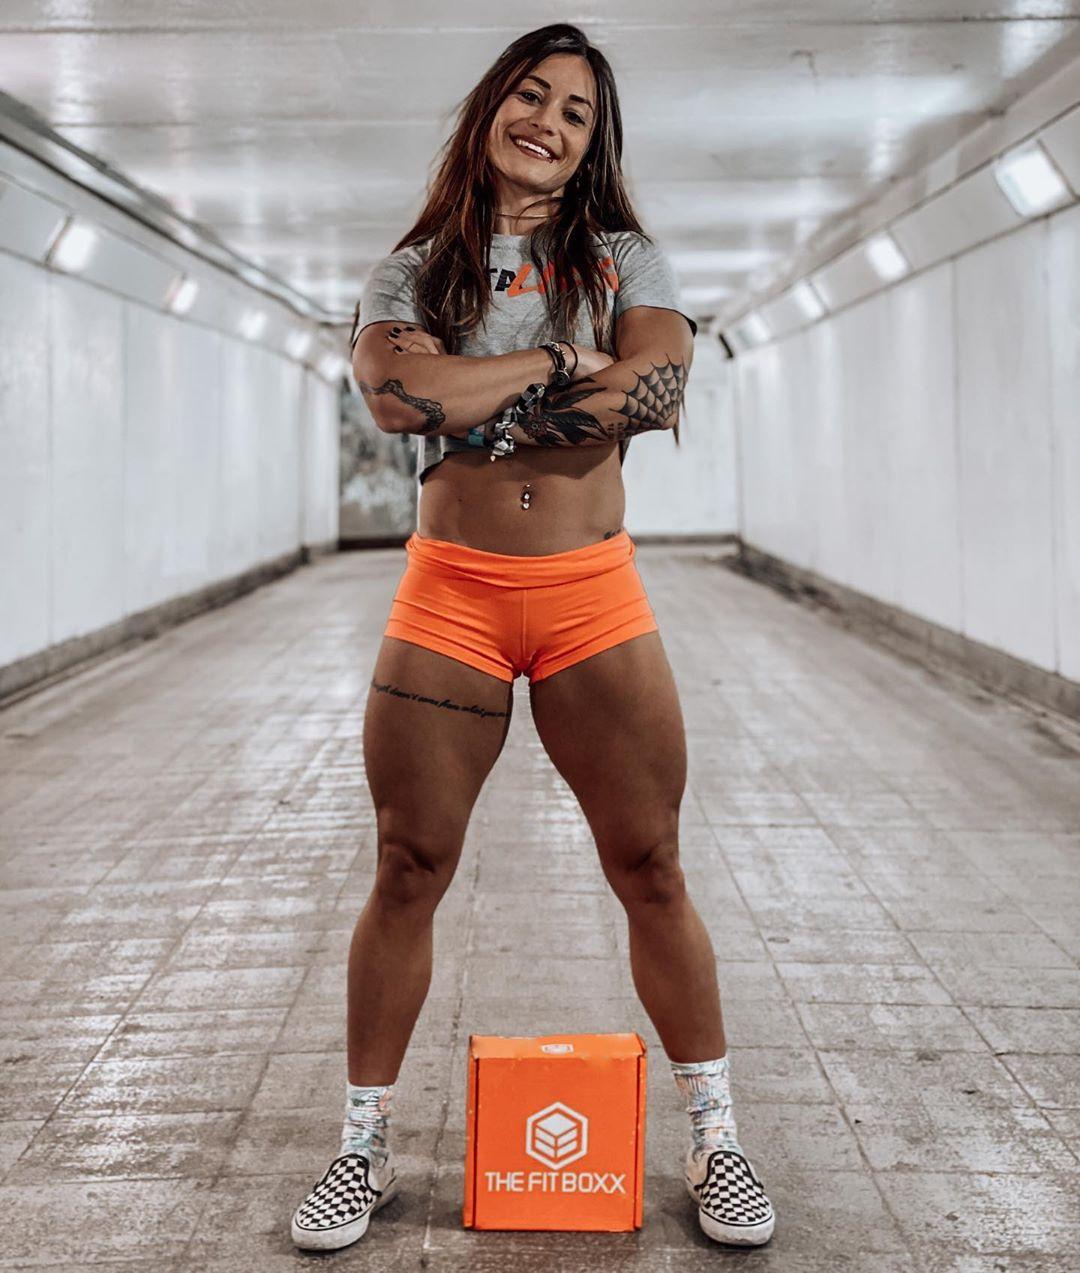 51 Hot Pictures Of Celia Gabbiani Which Make Certain To Grab Your Eye 7